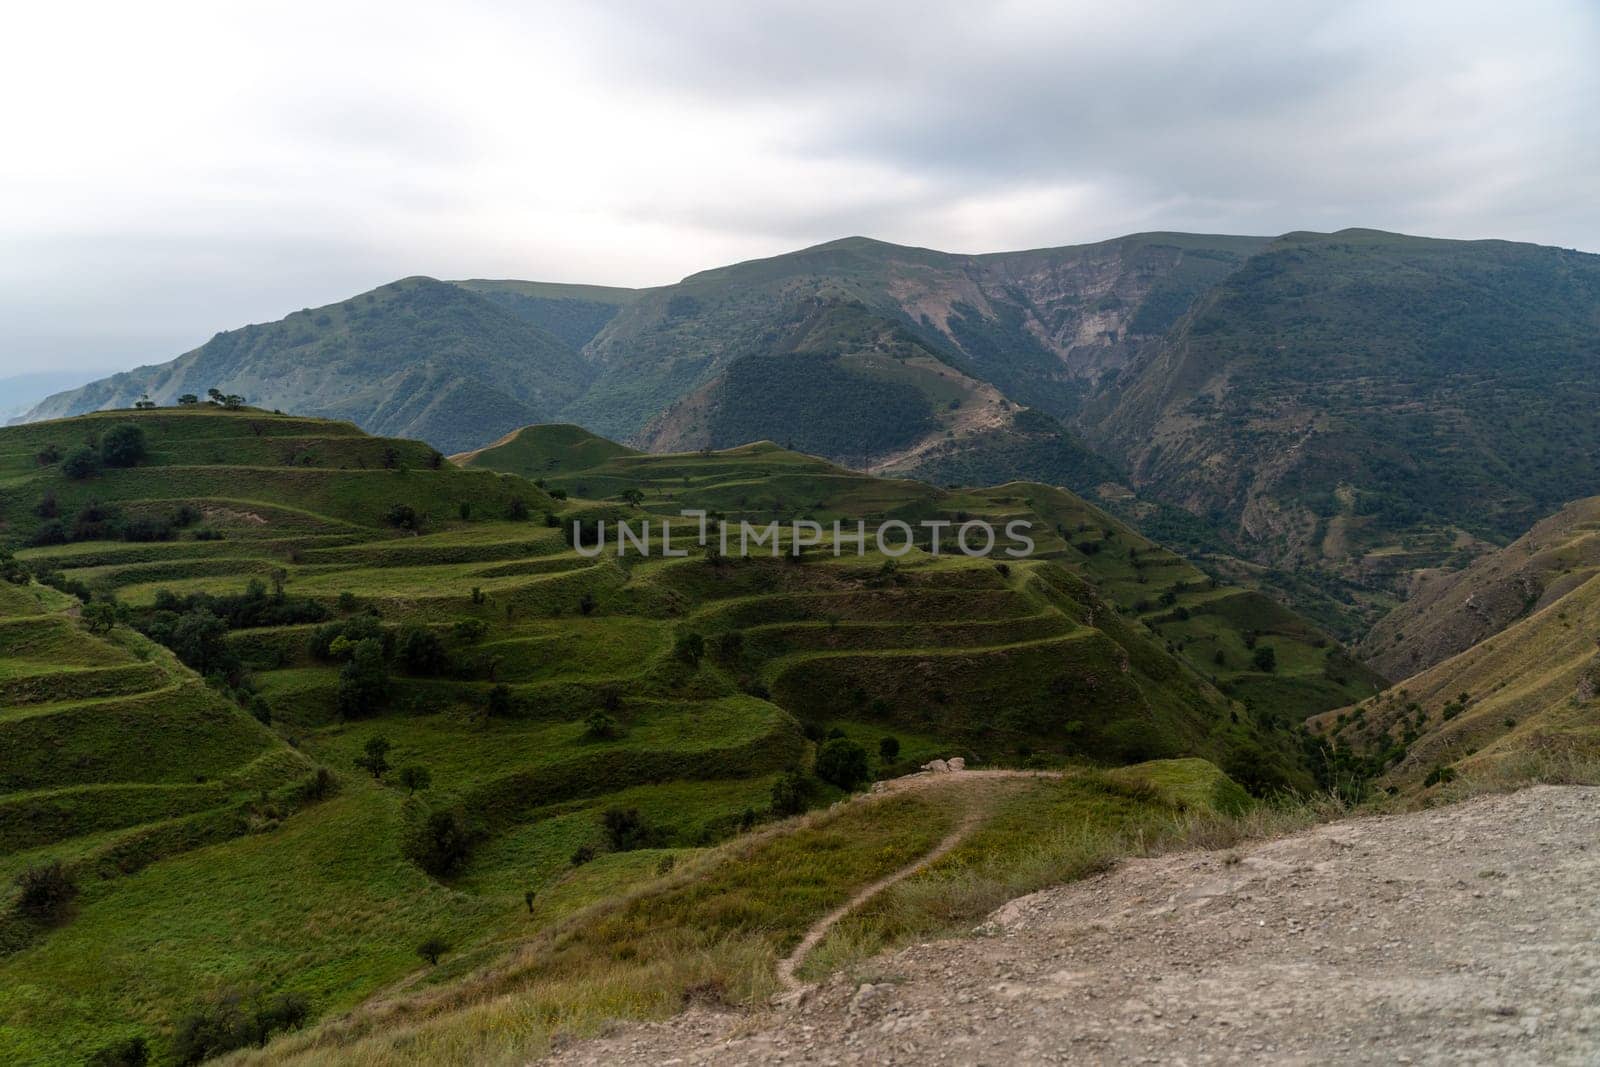 Chokhsky terraces Dagestan. Landscape of mountainous Dagestan with terraced fields and peaks mountains in the distance